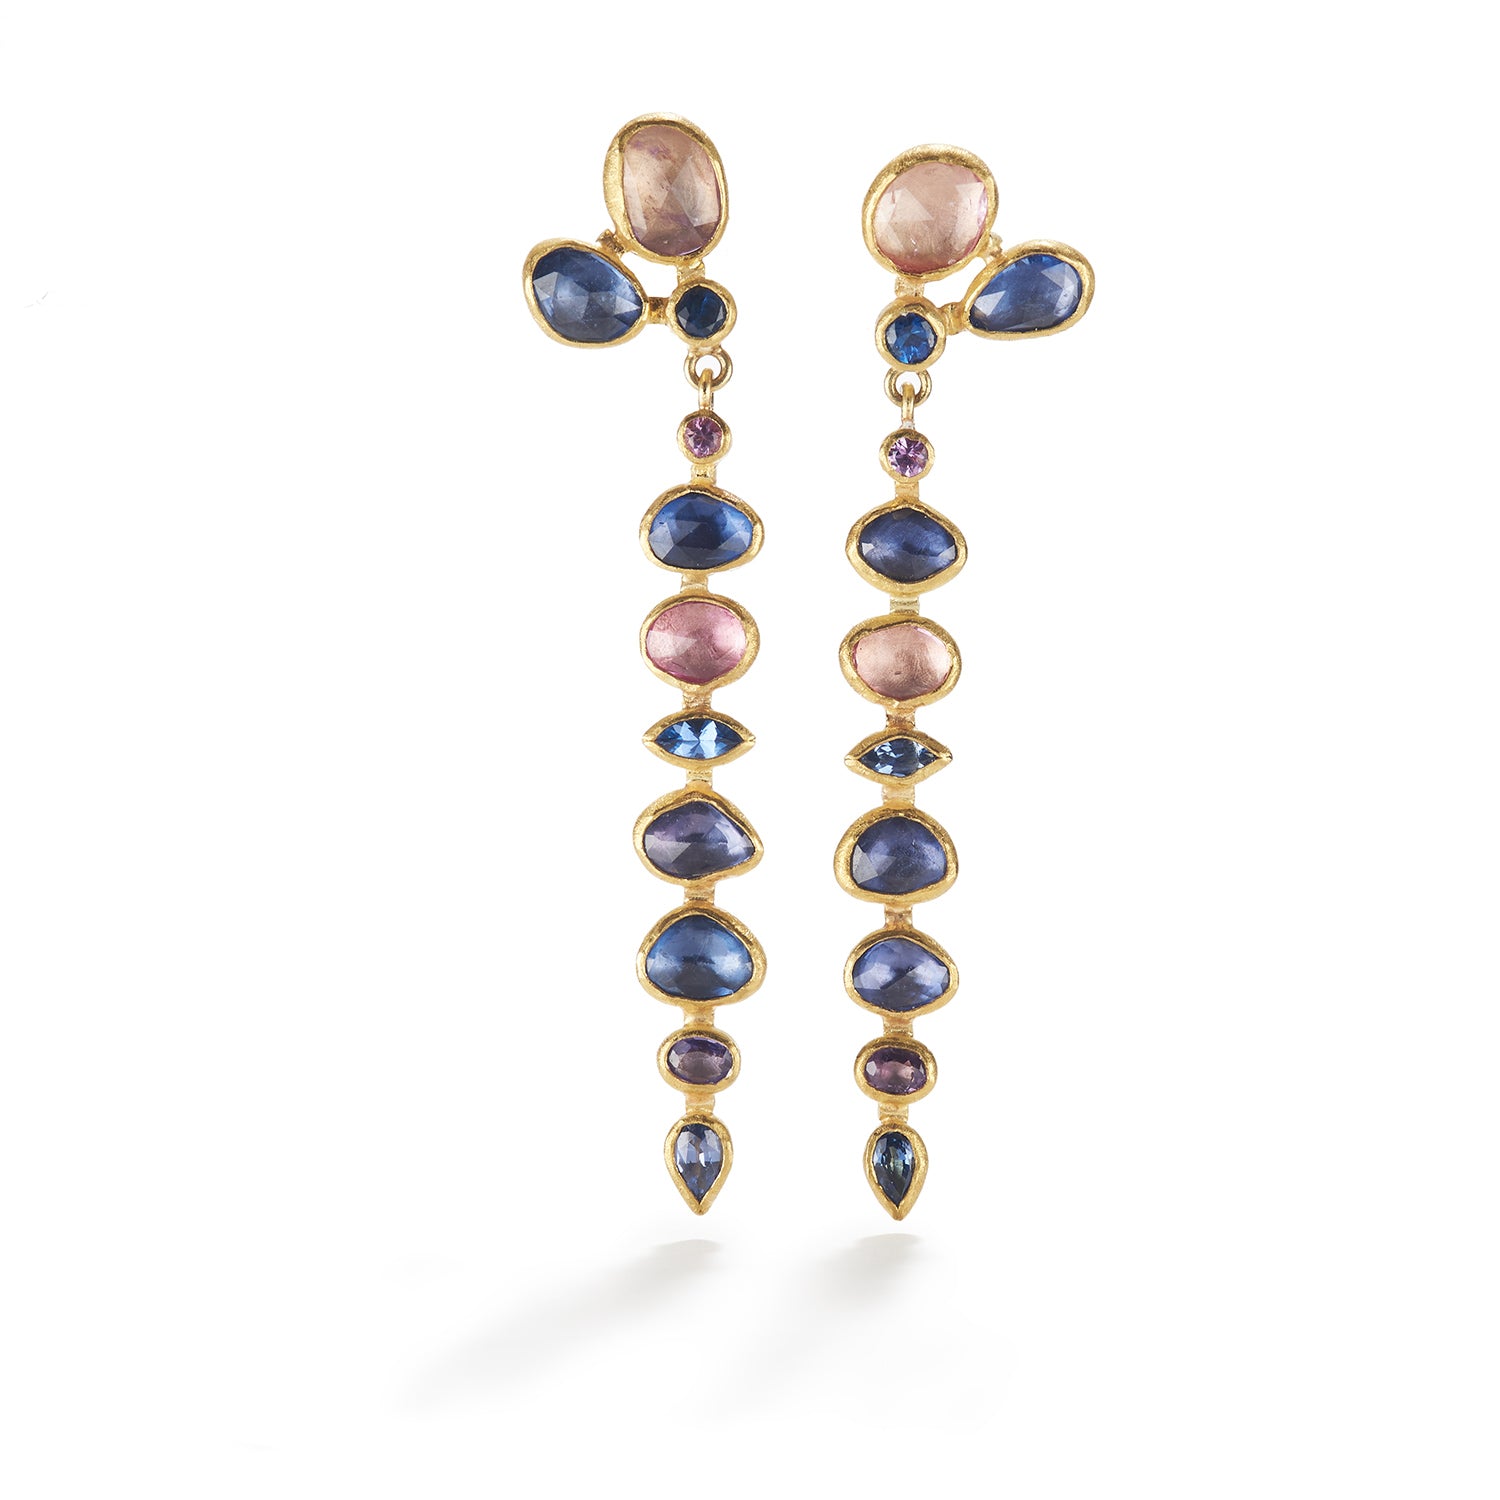 Rose cut, Faceted and Rough Sapphire Dangles